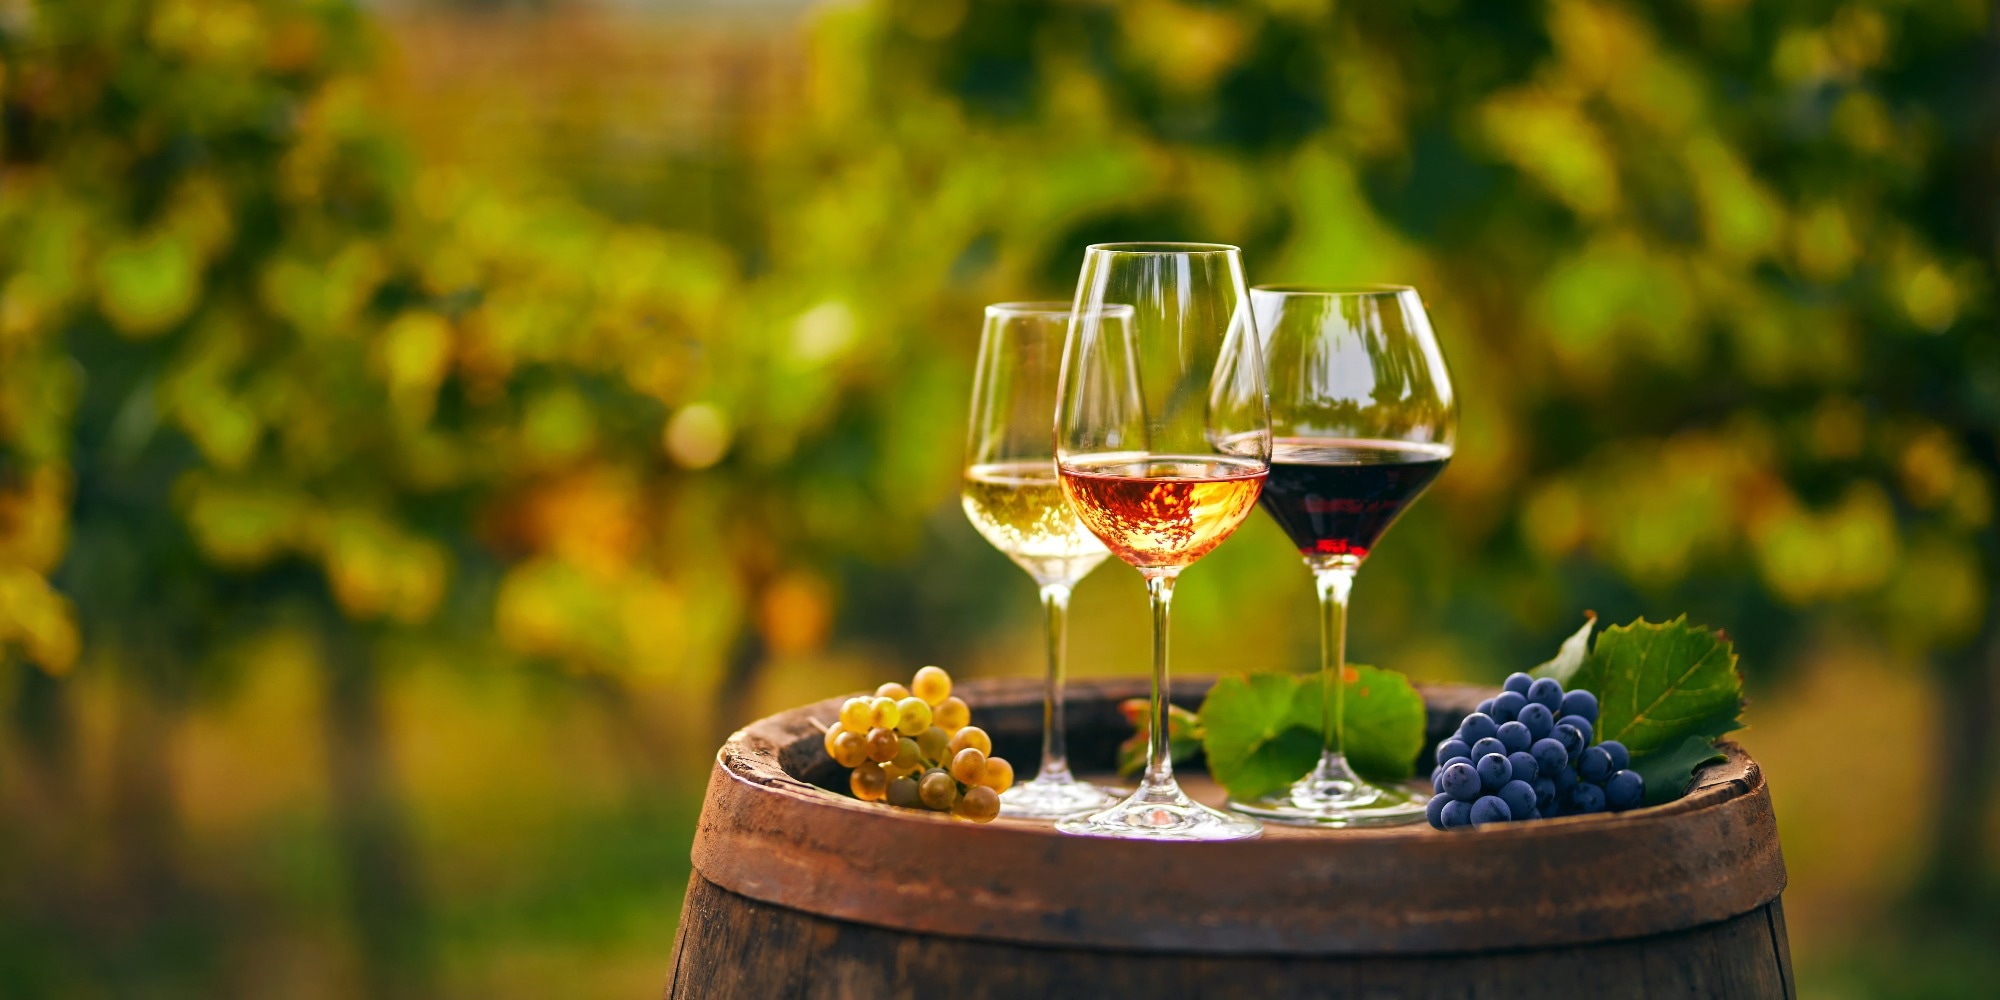 Study: The Wine Industry By-Products: Applications for Food Industry and Health Benefits. Image Credit: Rostislav_Sedlacek/Shutterstock